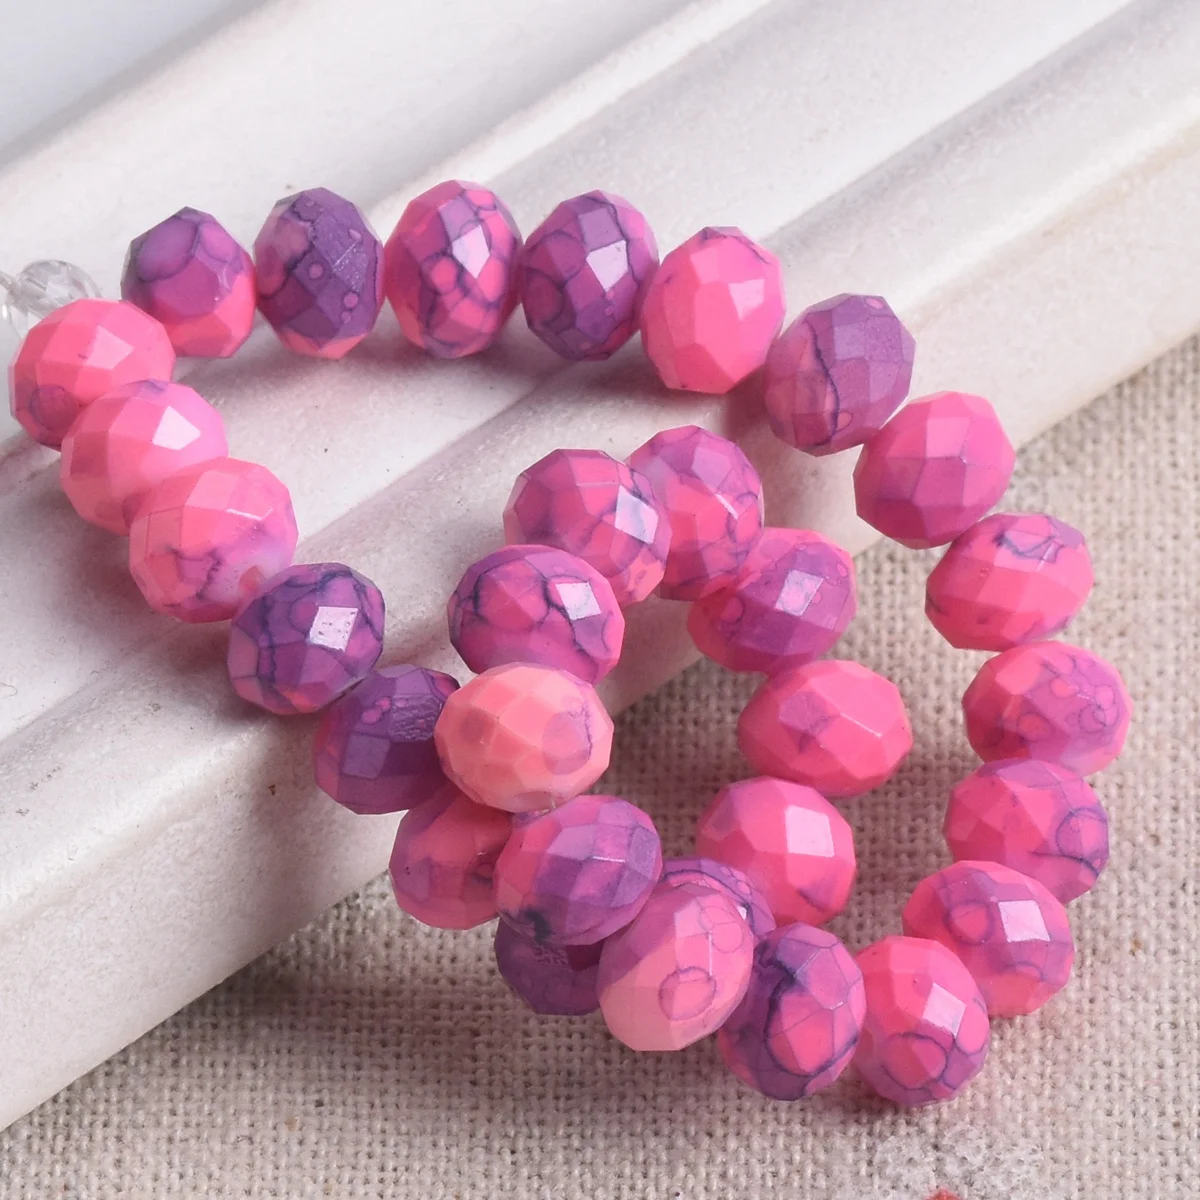 30pcs 8x6mm Rose Blue Coated Rondelle Faceted Opaque Glass Loose Spacer Beads Lot For Jewelry Making DIY Crafts Findings 4pcs e27 5w 7w 9w 220v 110v rgb color 7 led color plastic coated aluminum colorful red yellow green blue decorative lantern bulb